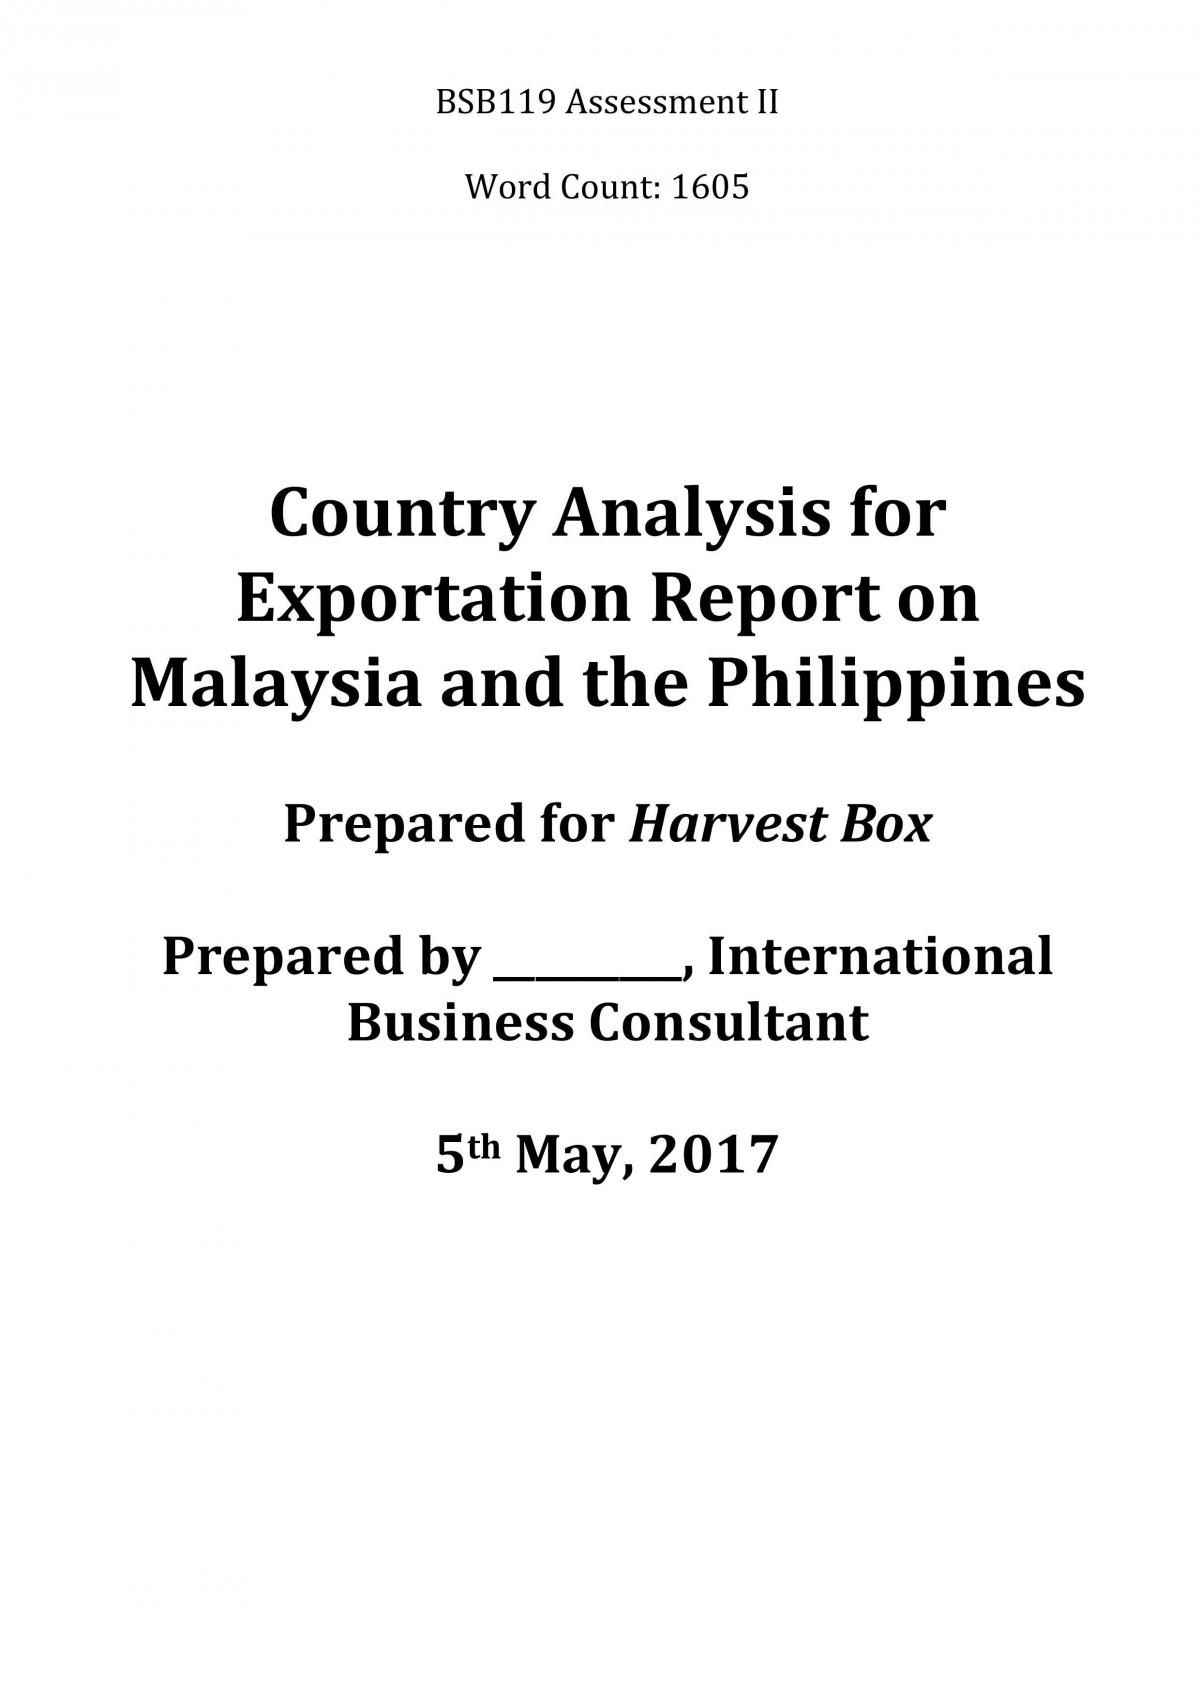 Country Analysis Report | BSB119 - Global Business - QUT | Thinkswap